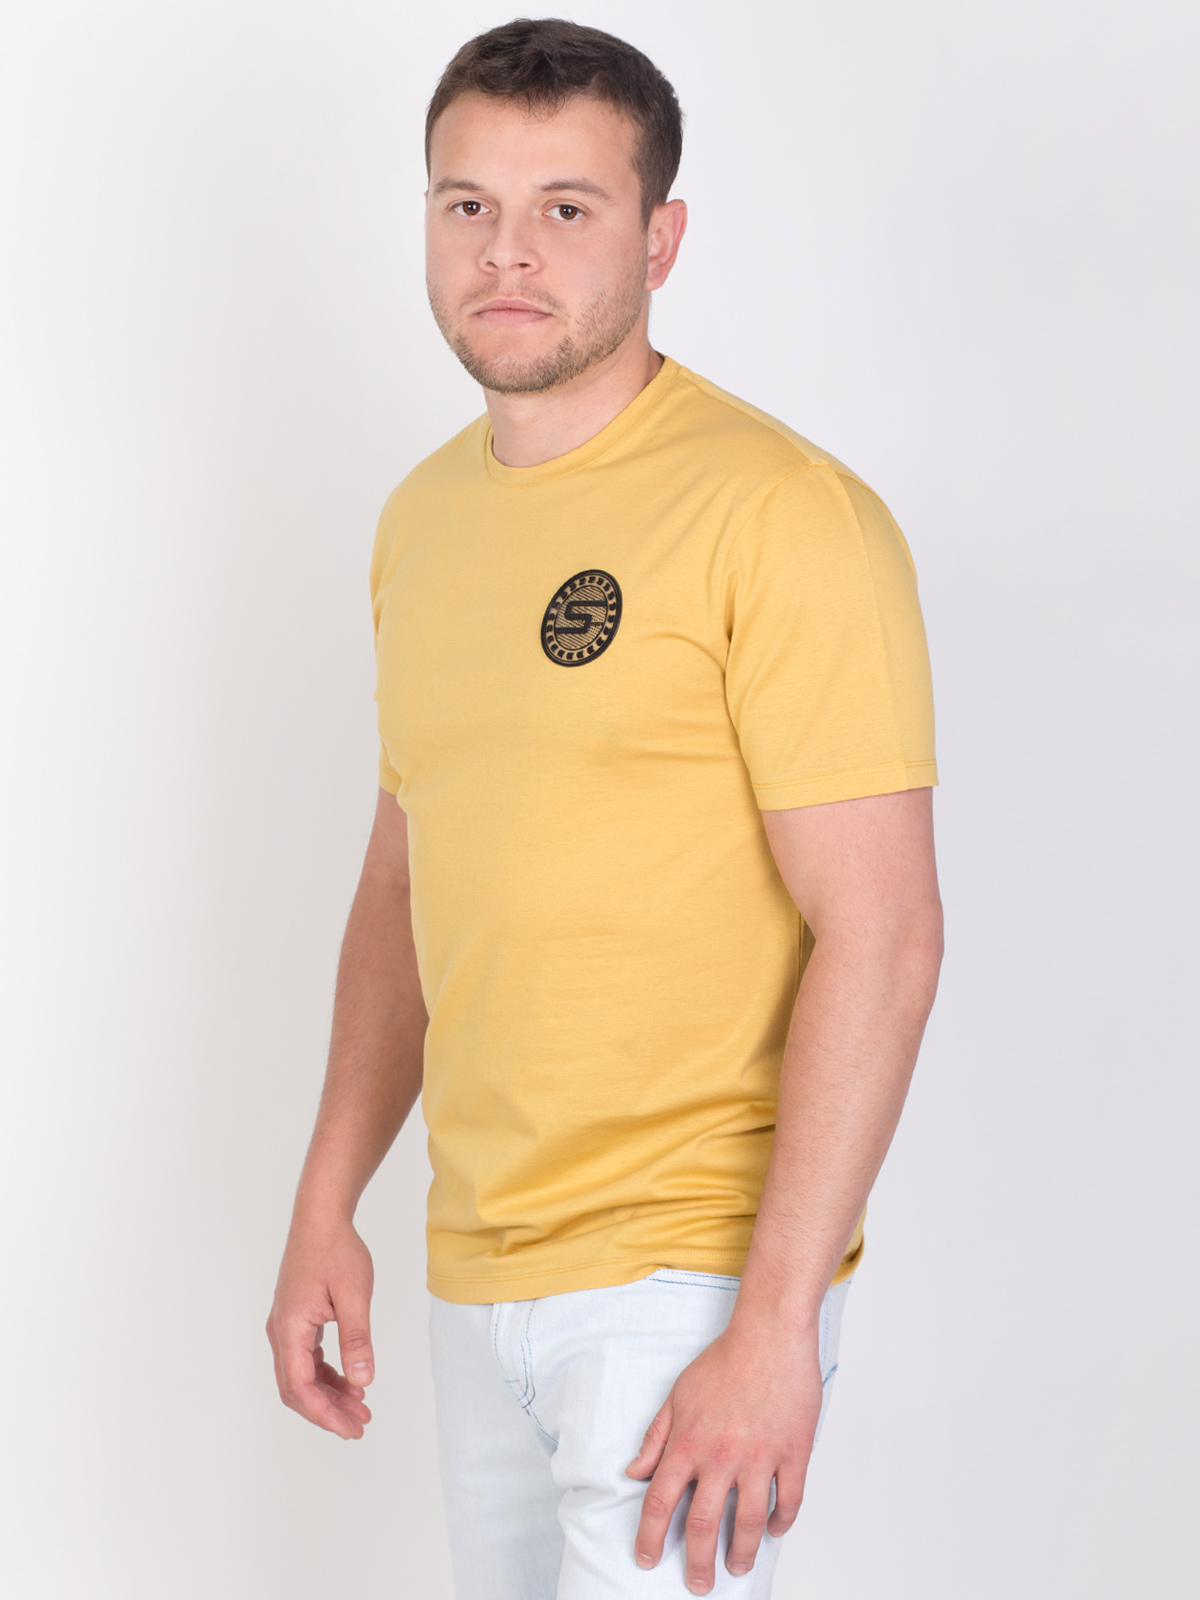 Cotton tshirt with a round patch - 96378 € 11.81 img4